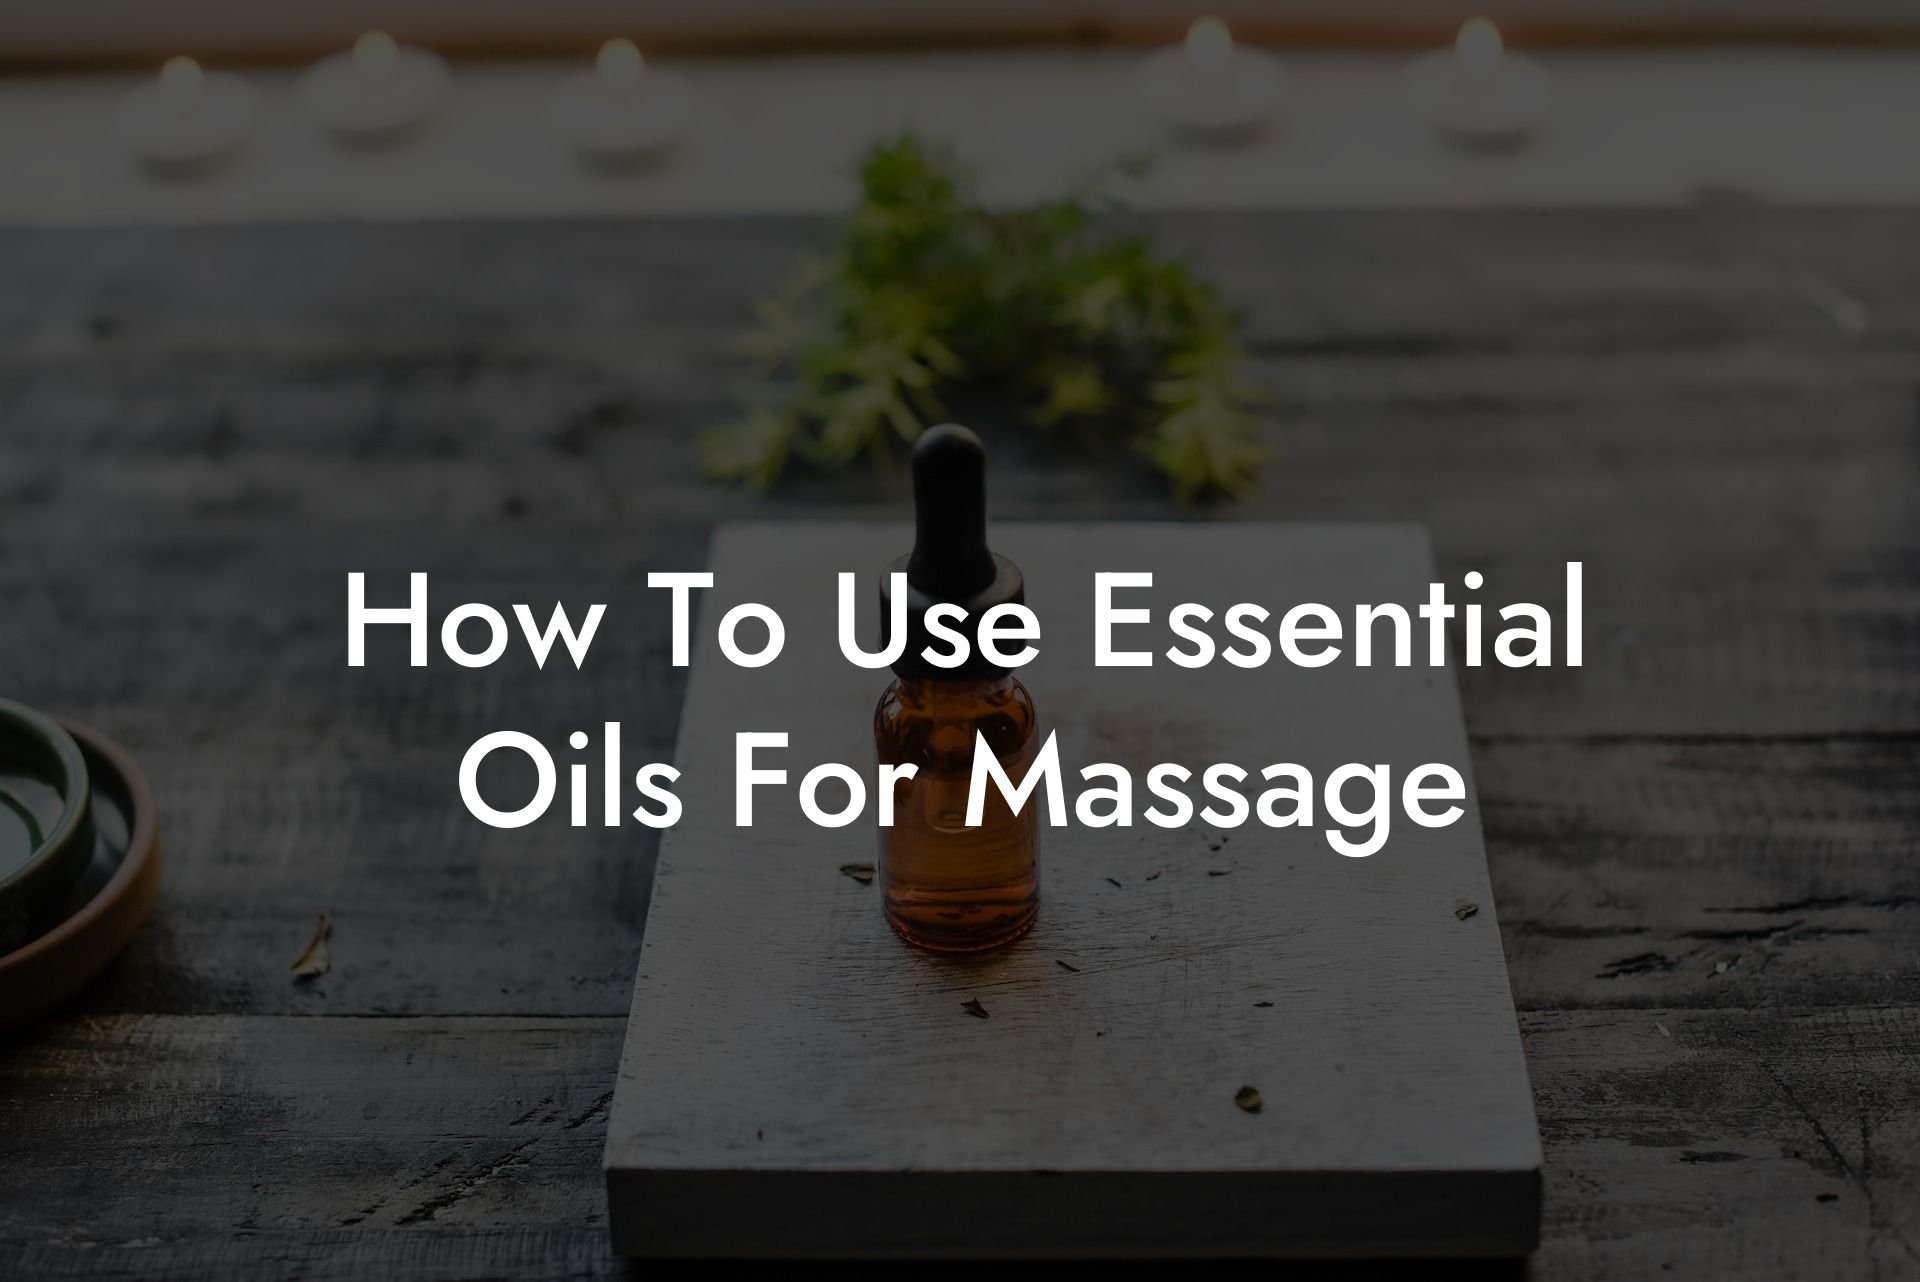 How To Use Essential Oils For Massage